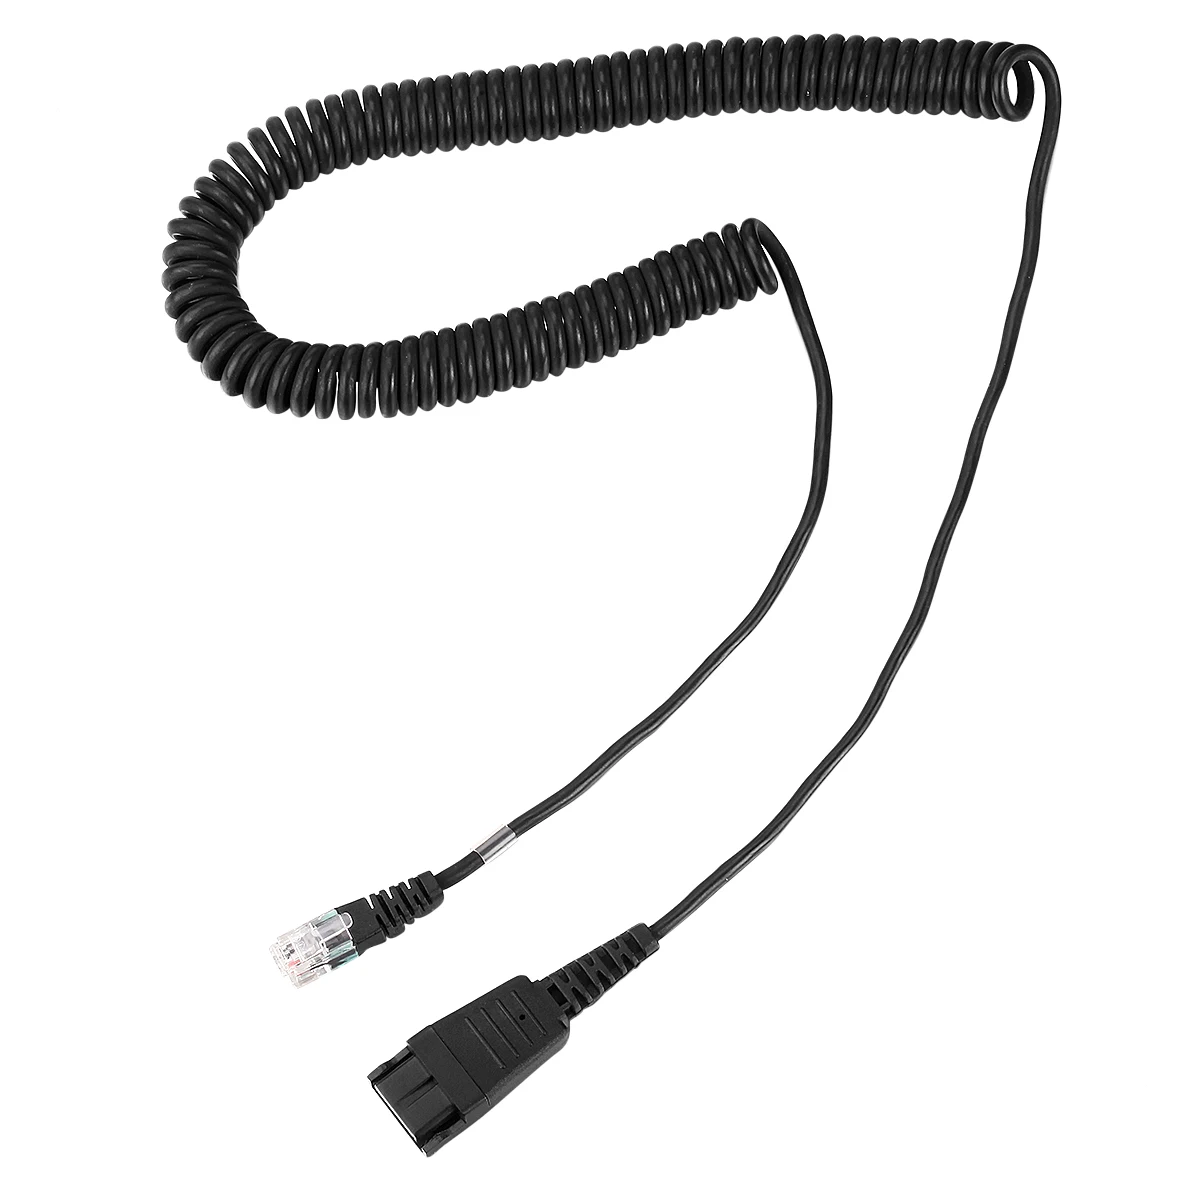 

Quick Disconnect Plug QD to R9 Bottom Headset Cable for GN Netcom, Black